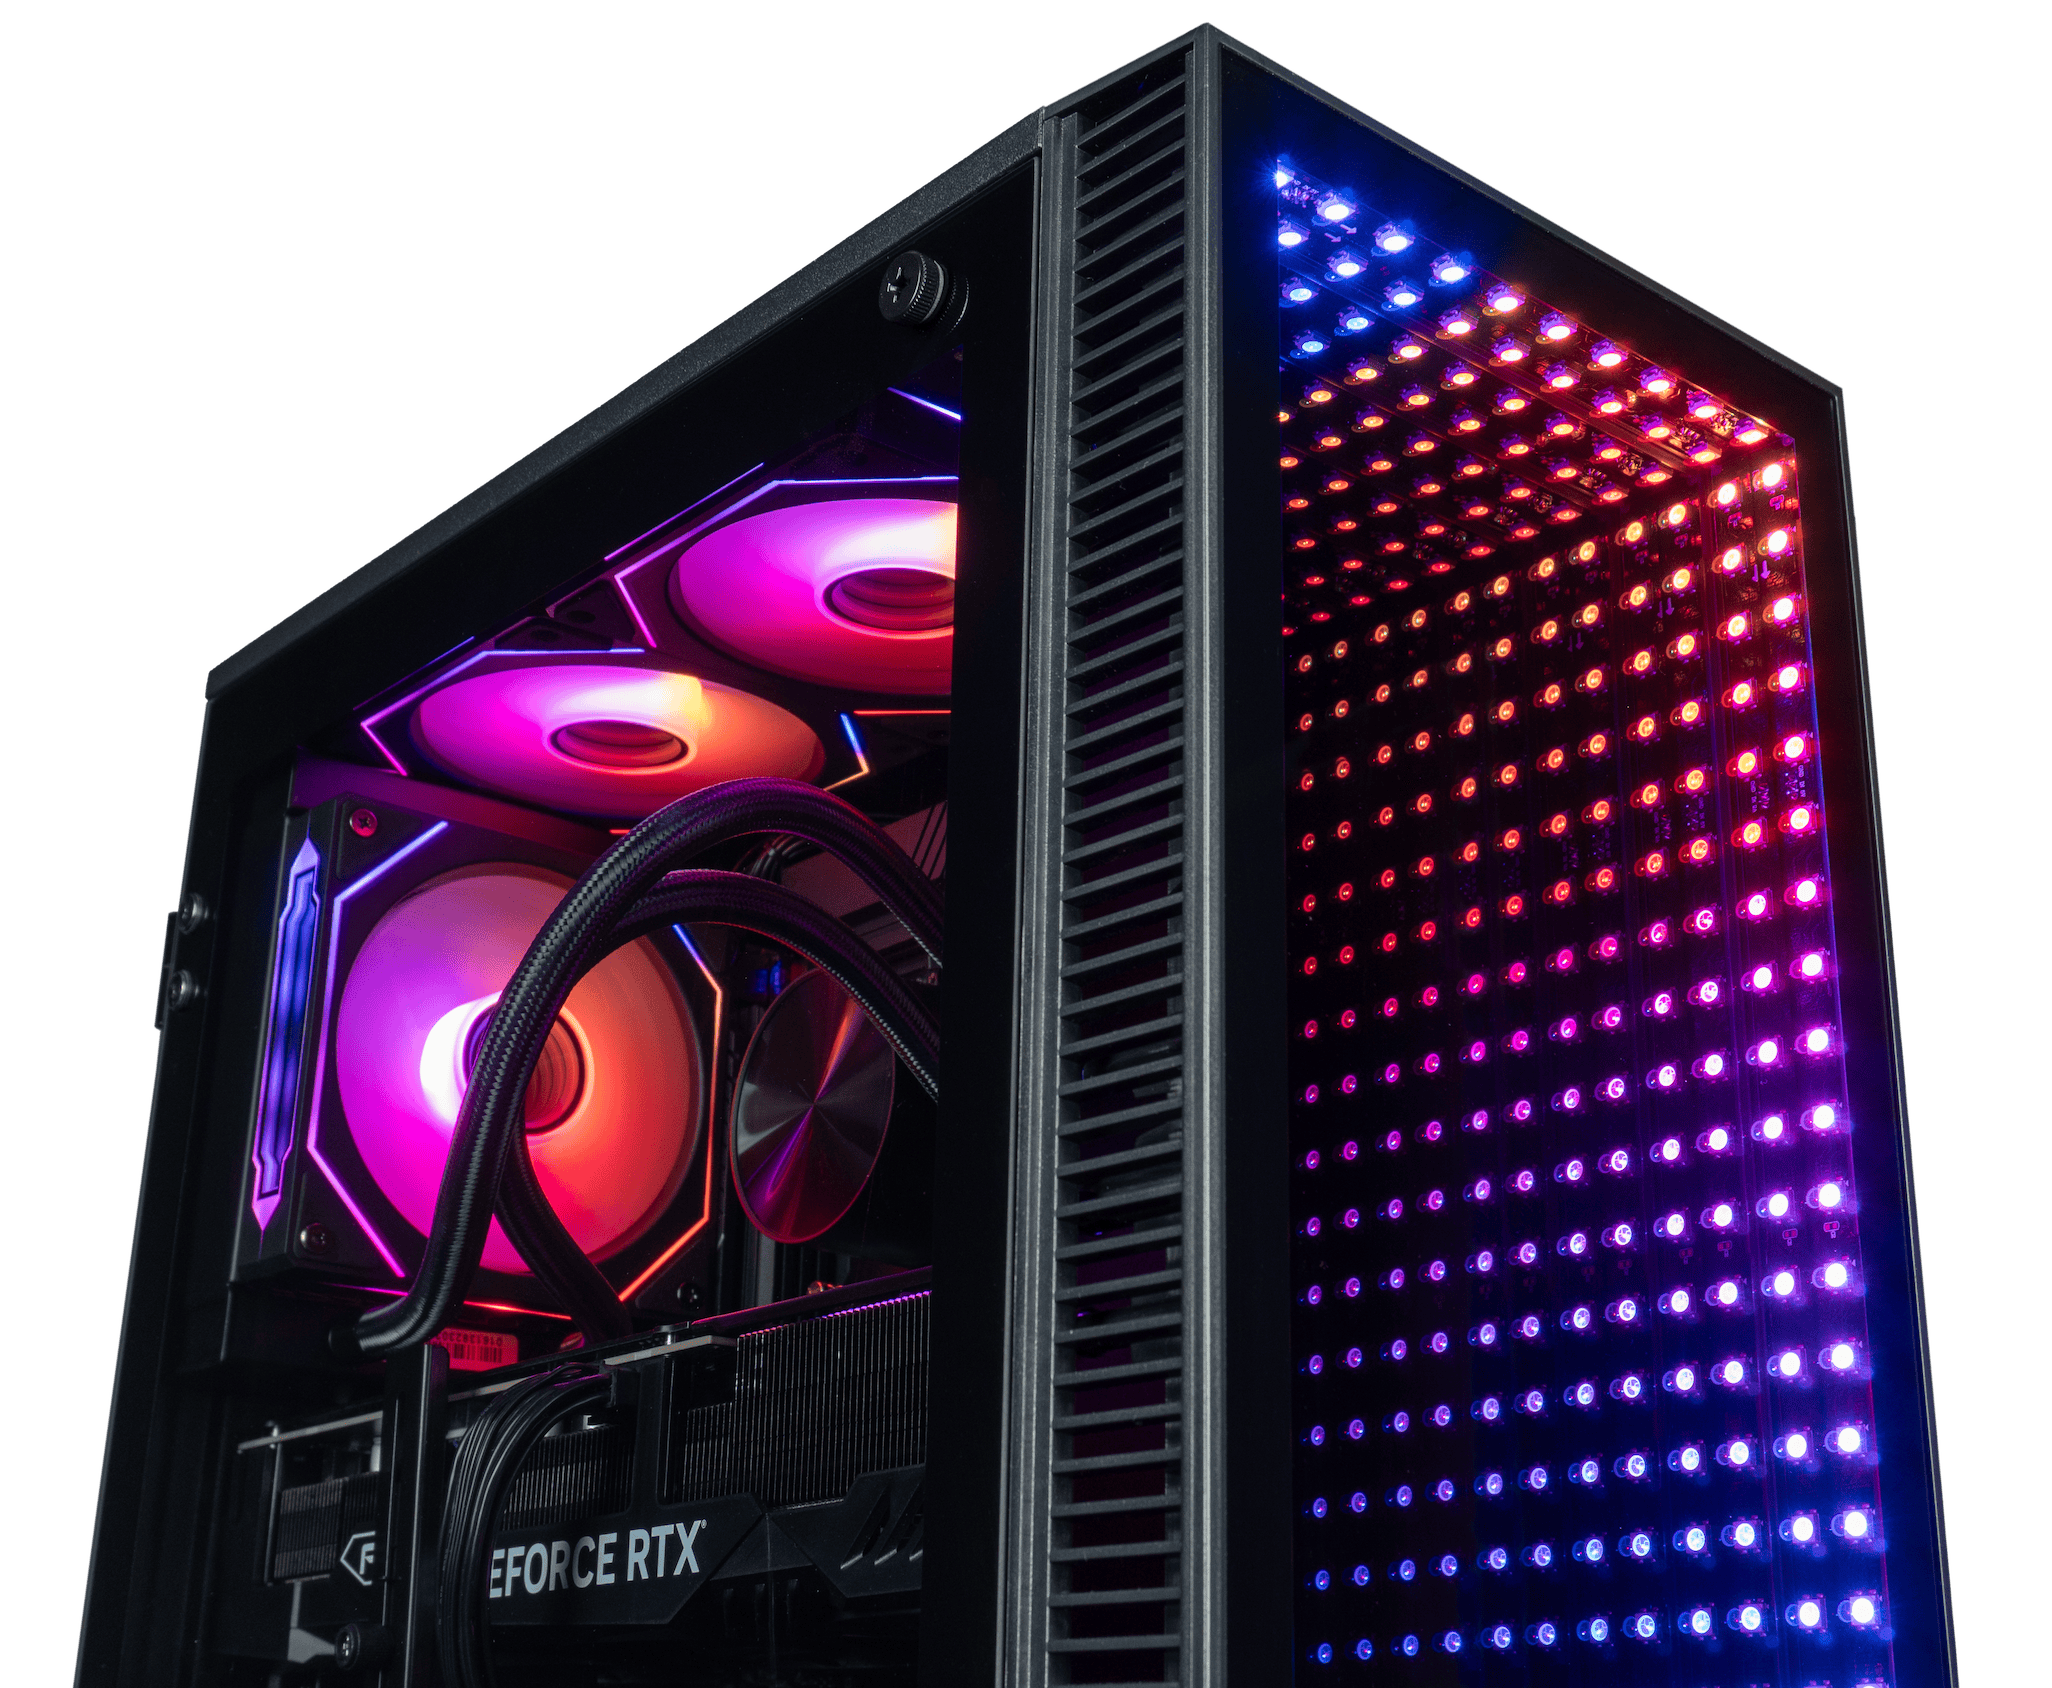 With the necessary airflow, the Continuum would make for an awesome RTX 4080 PC unlike the ABS PC and MSI gaming PC.